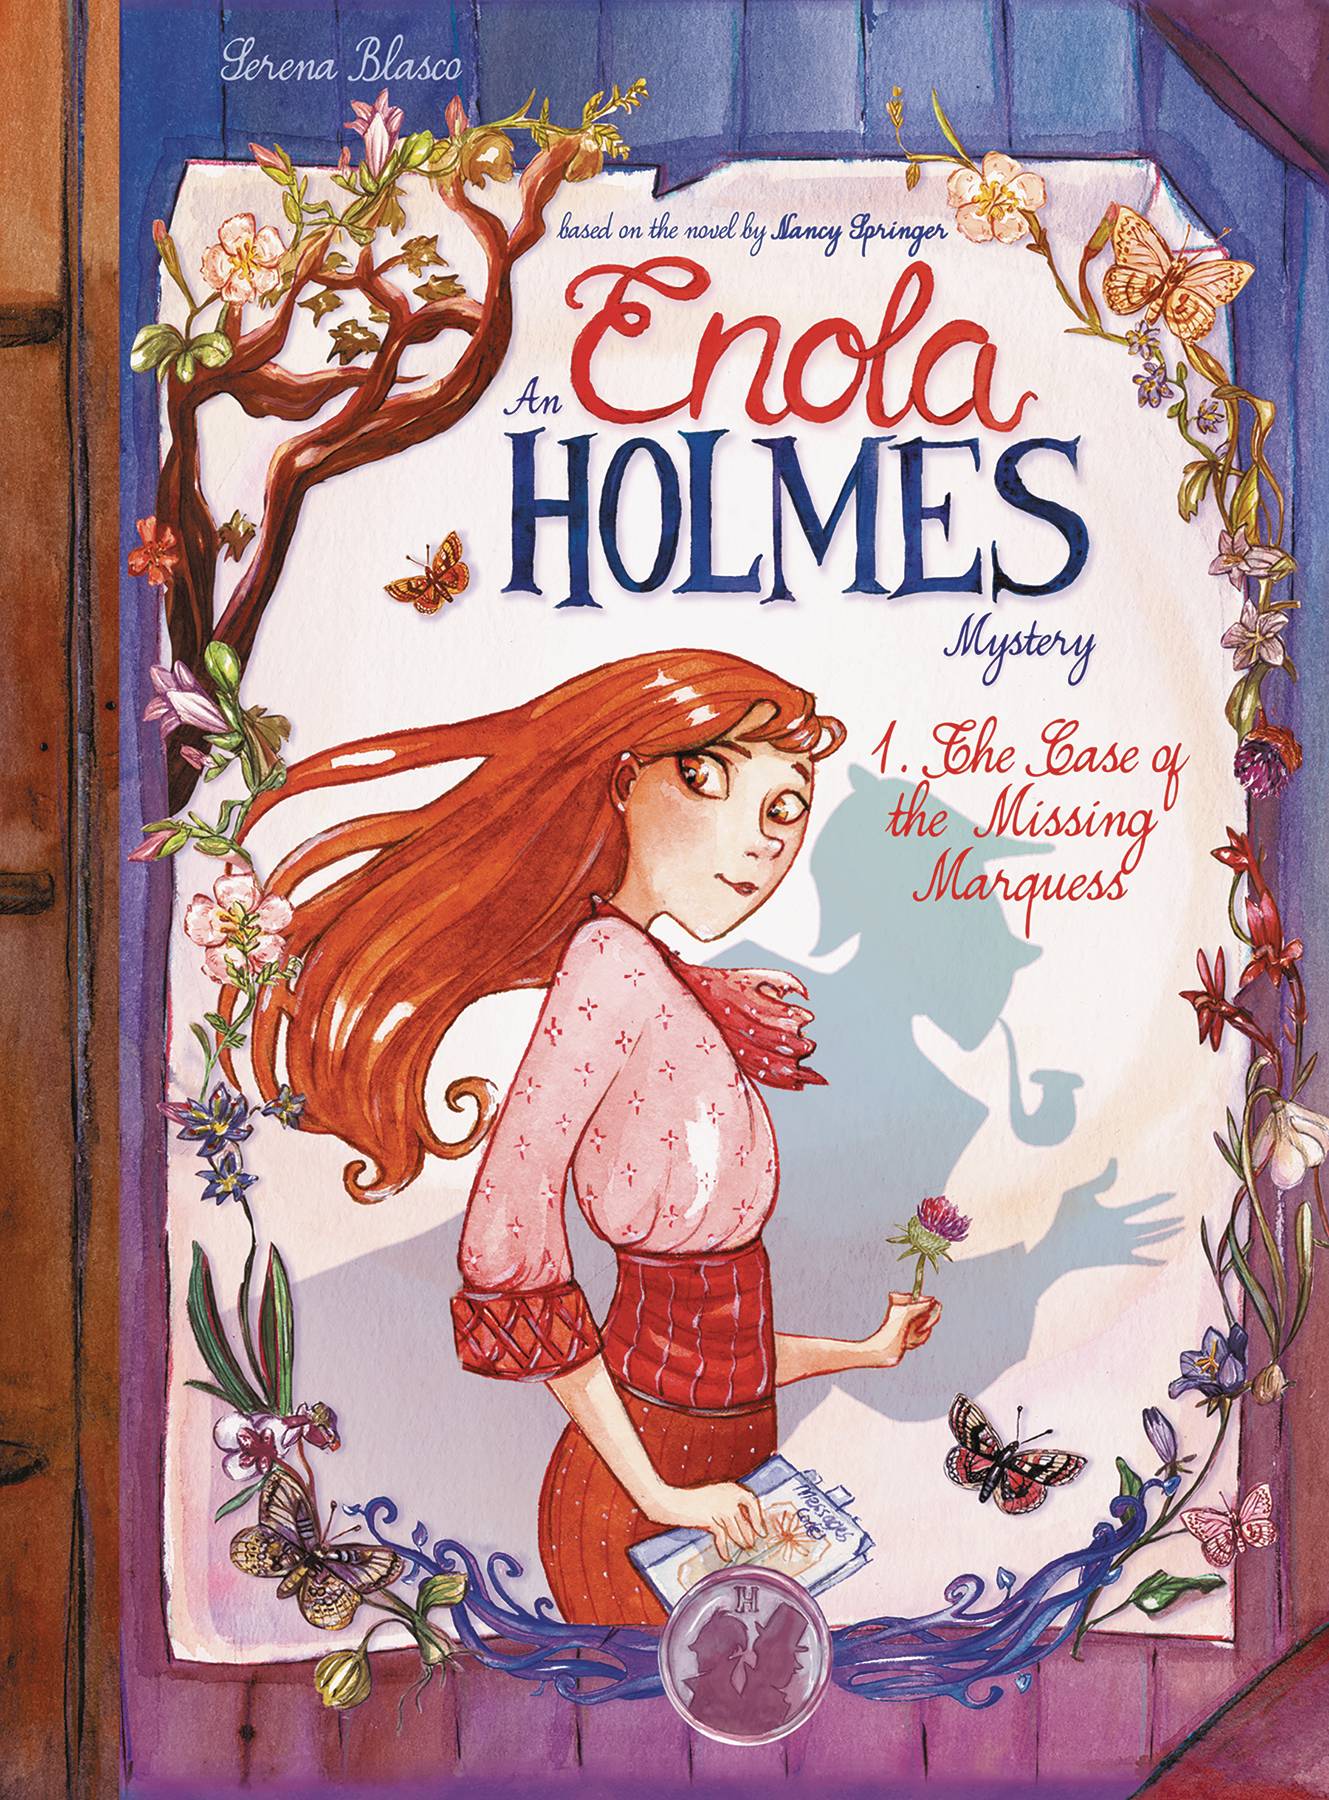 Enola Holmes Hc Vol. 01 The Case of the Missing Marquess